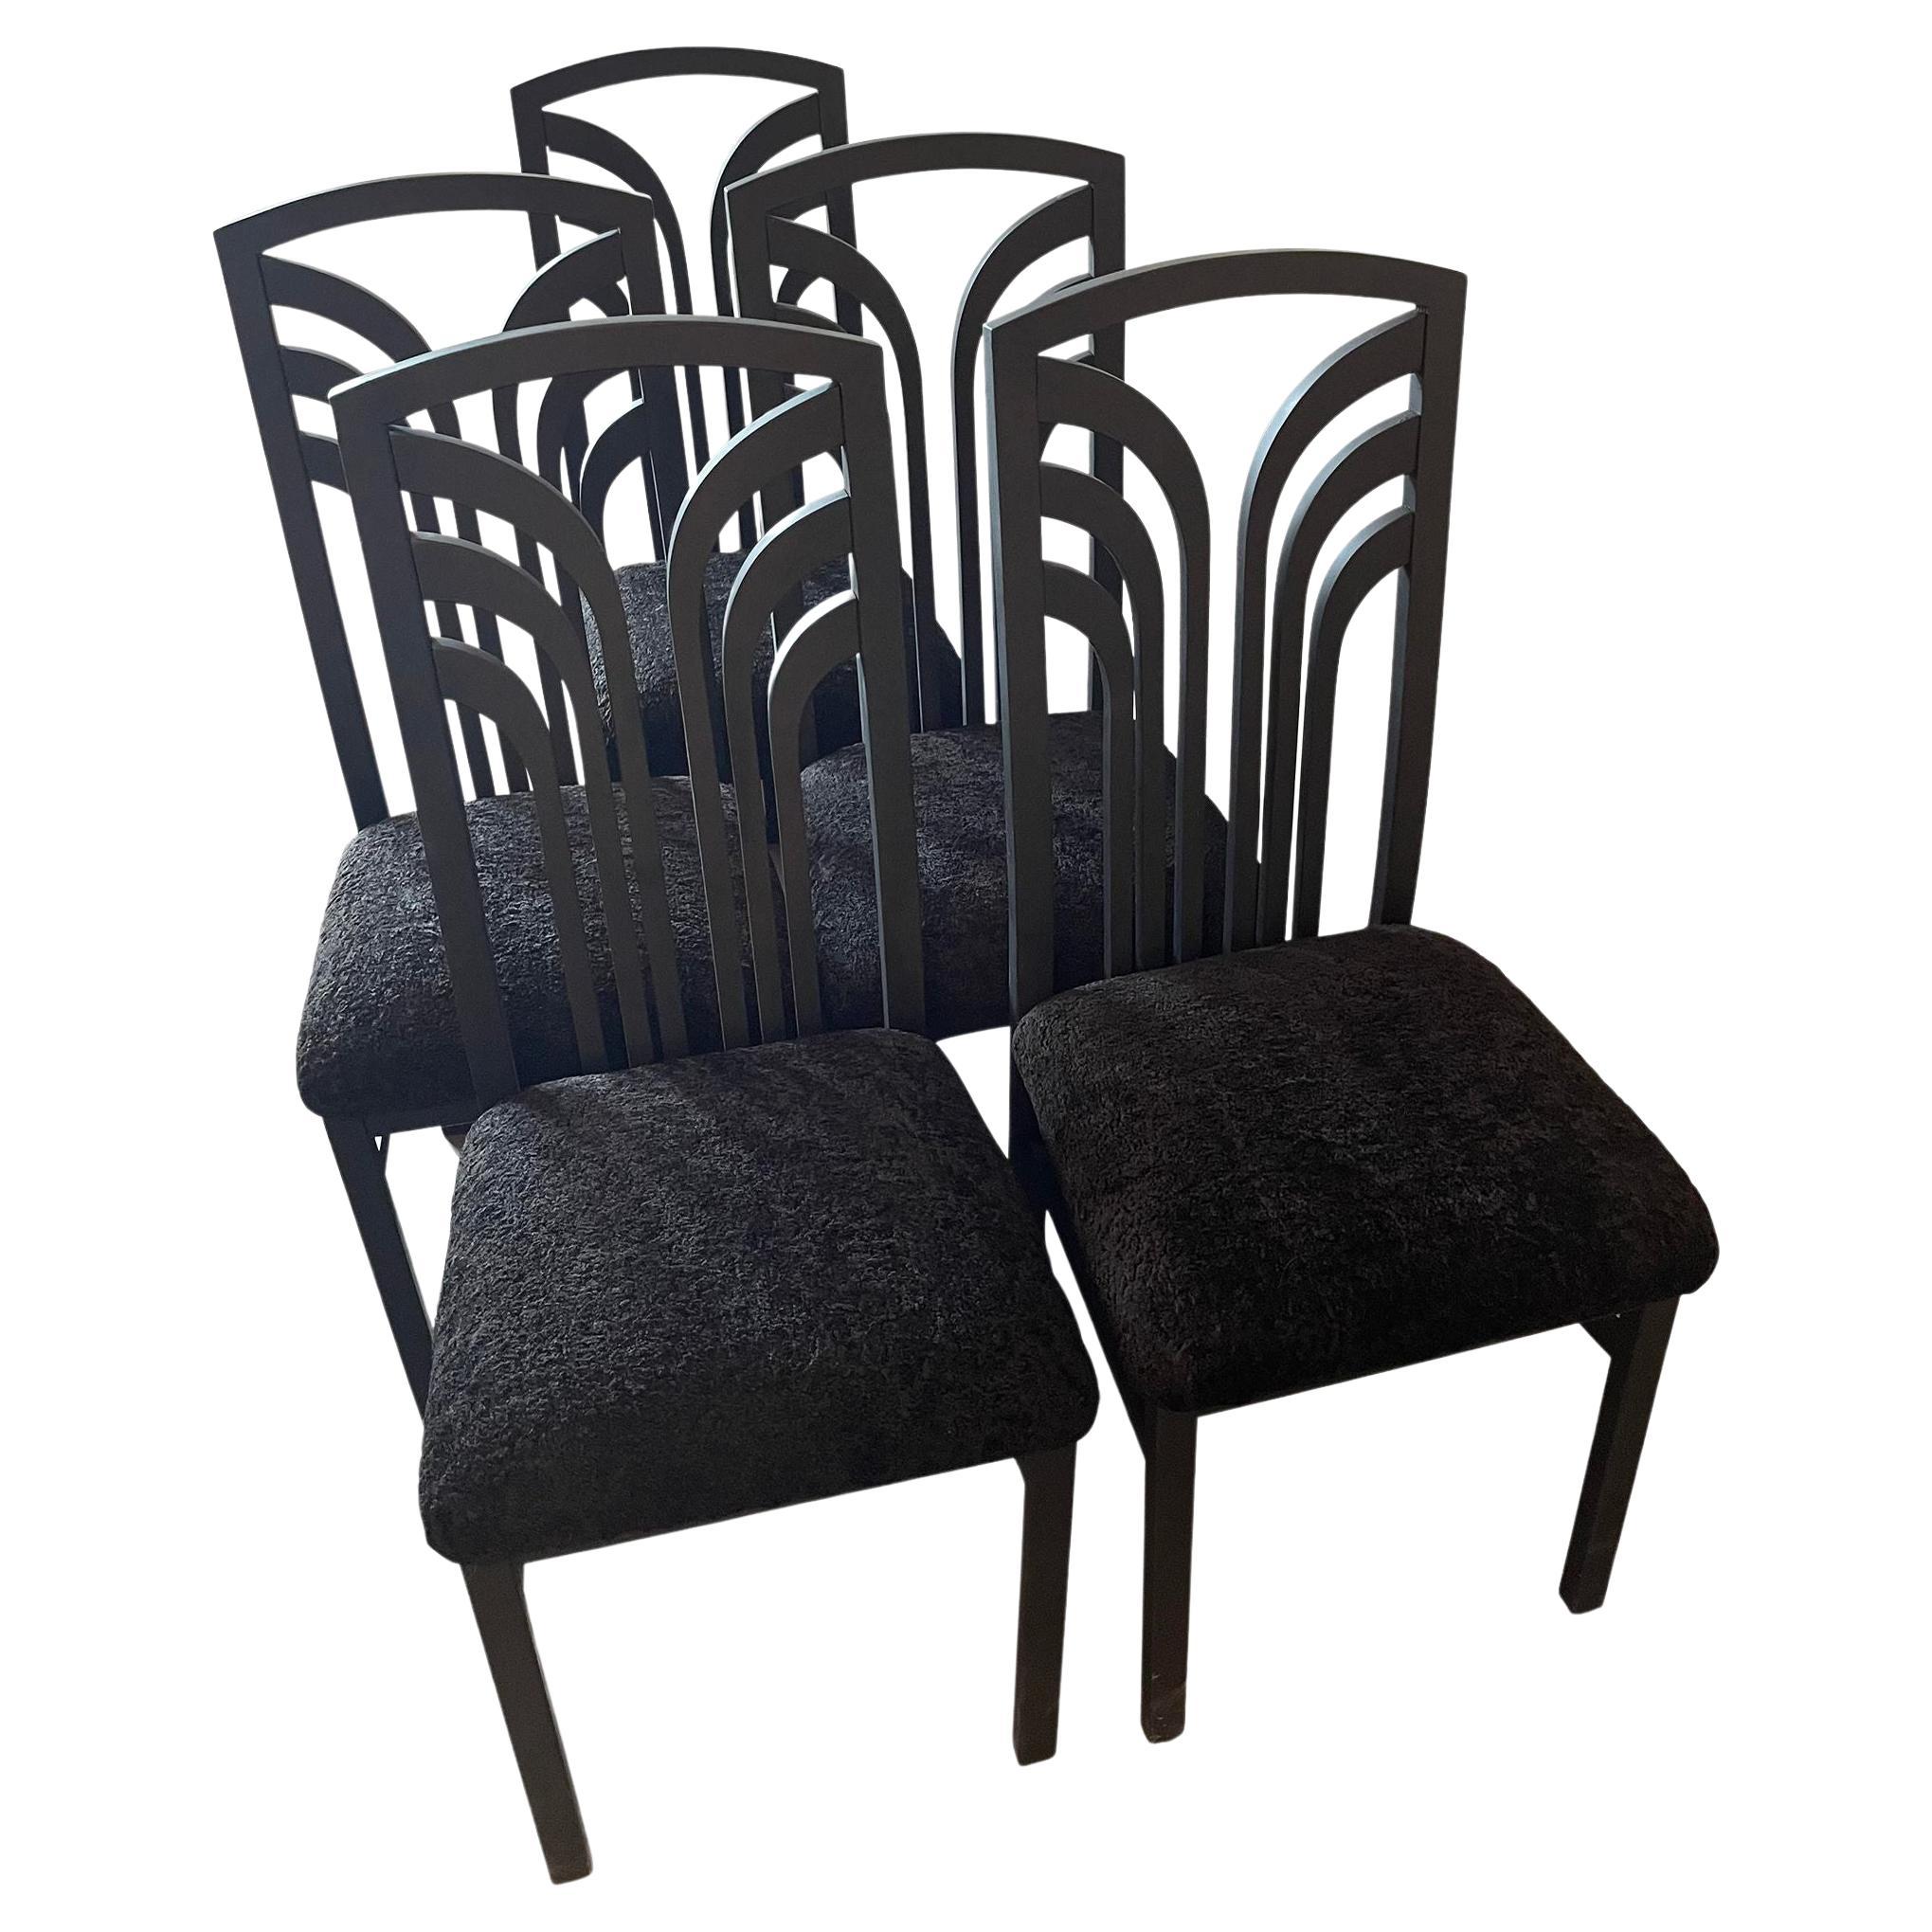 1980s Postmodern Dining Chairs, Set of 5